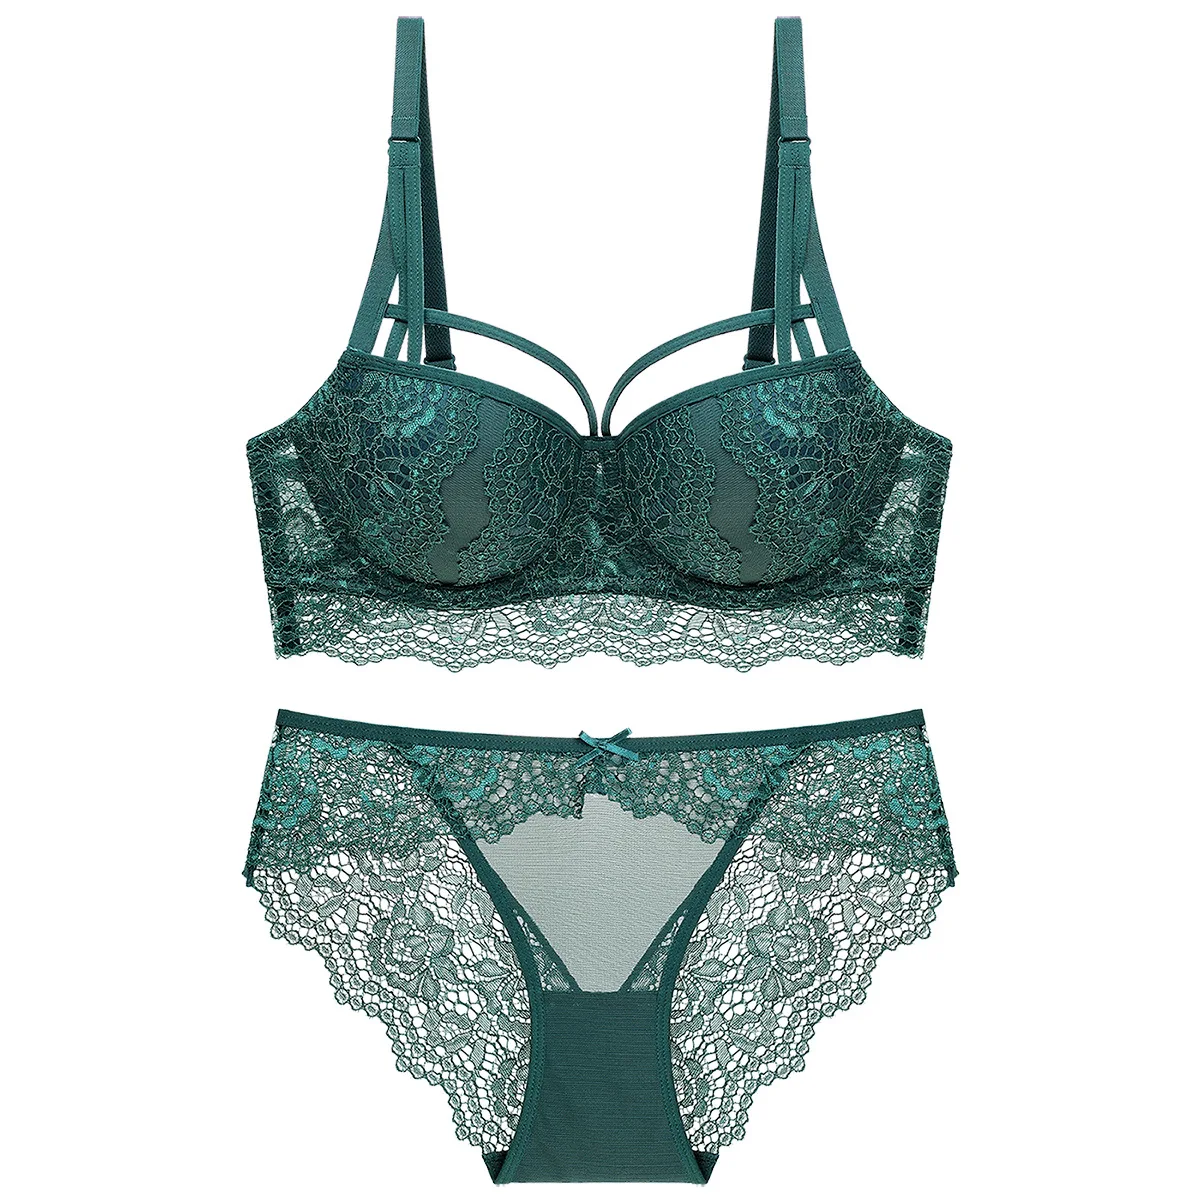 3/4 Cup Brand Green Lace Lingerie